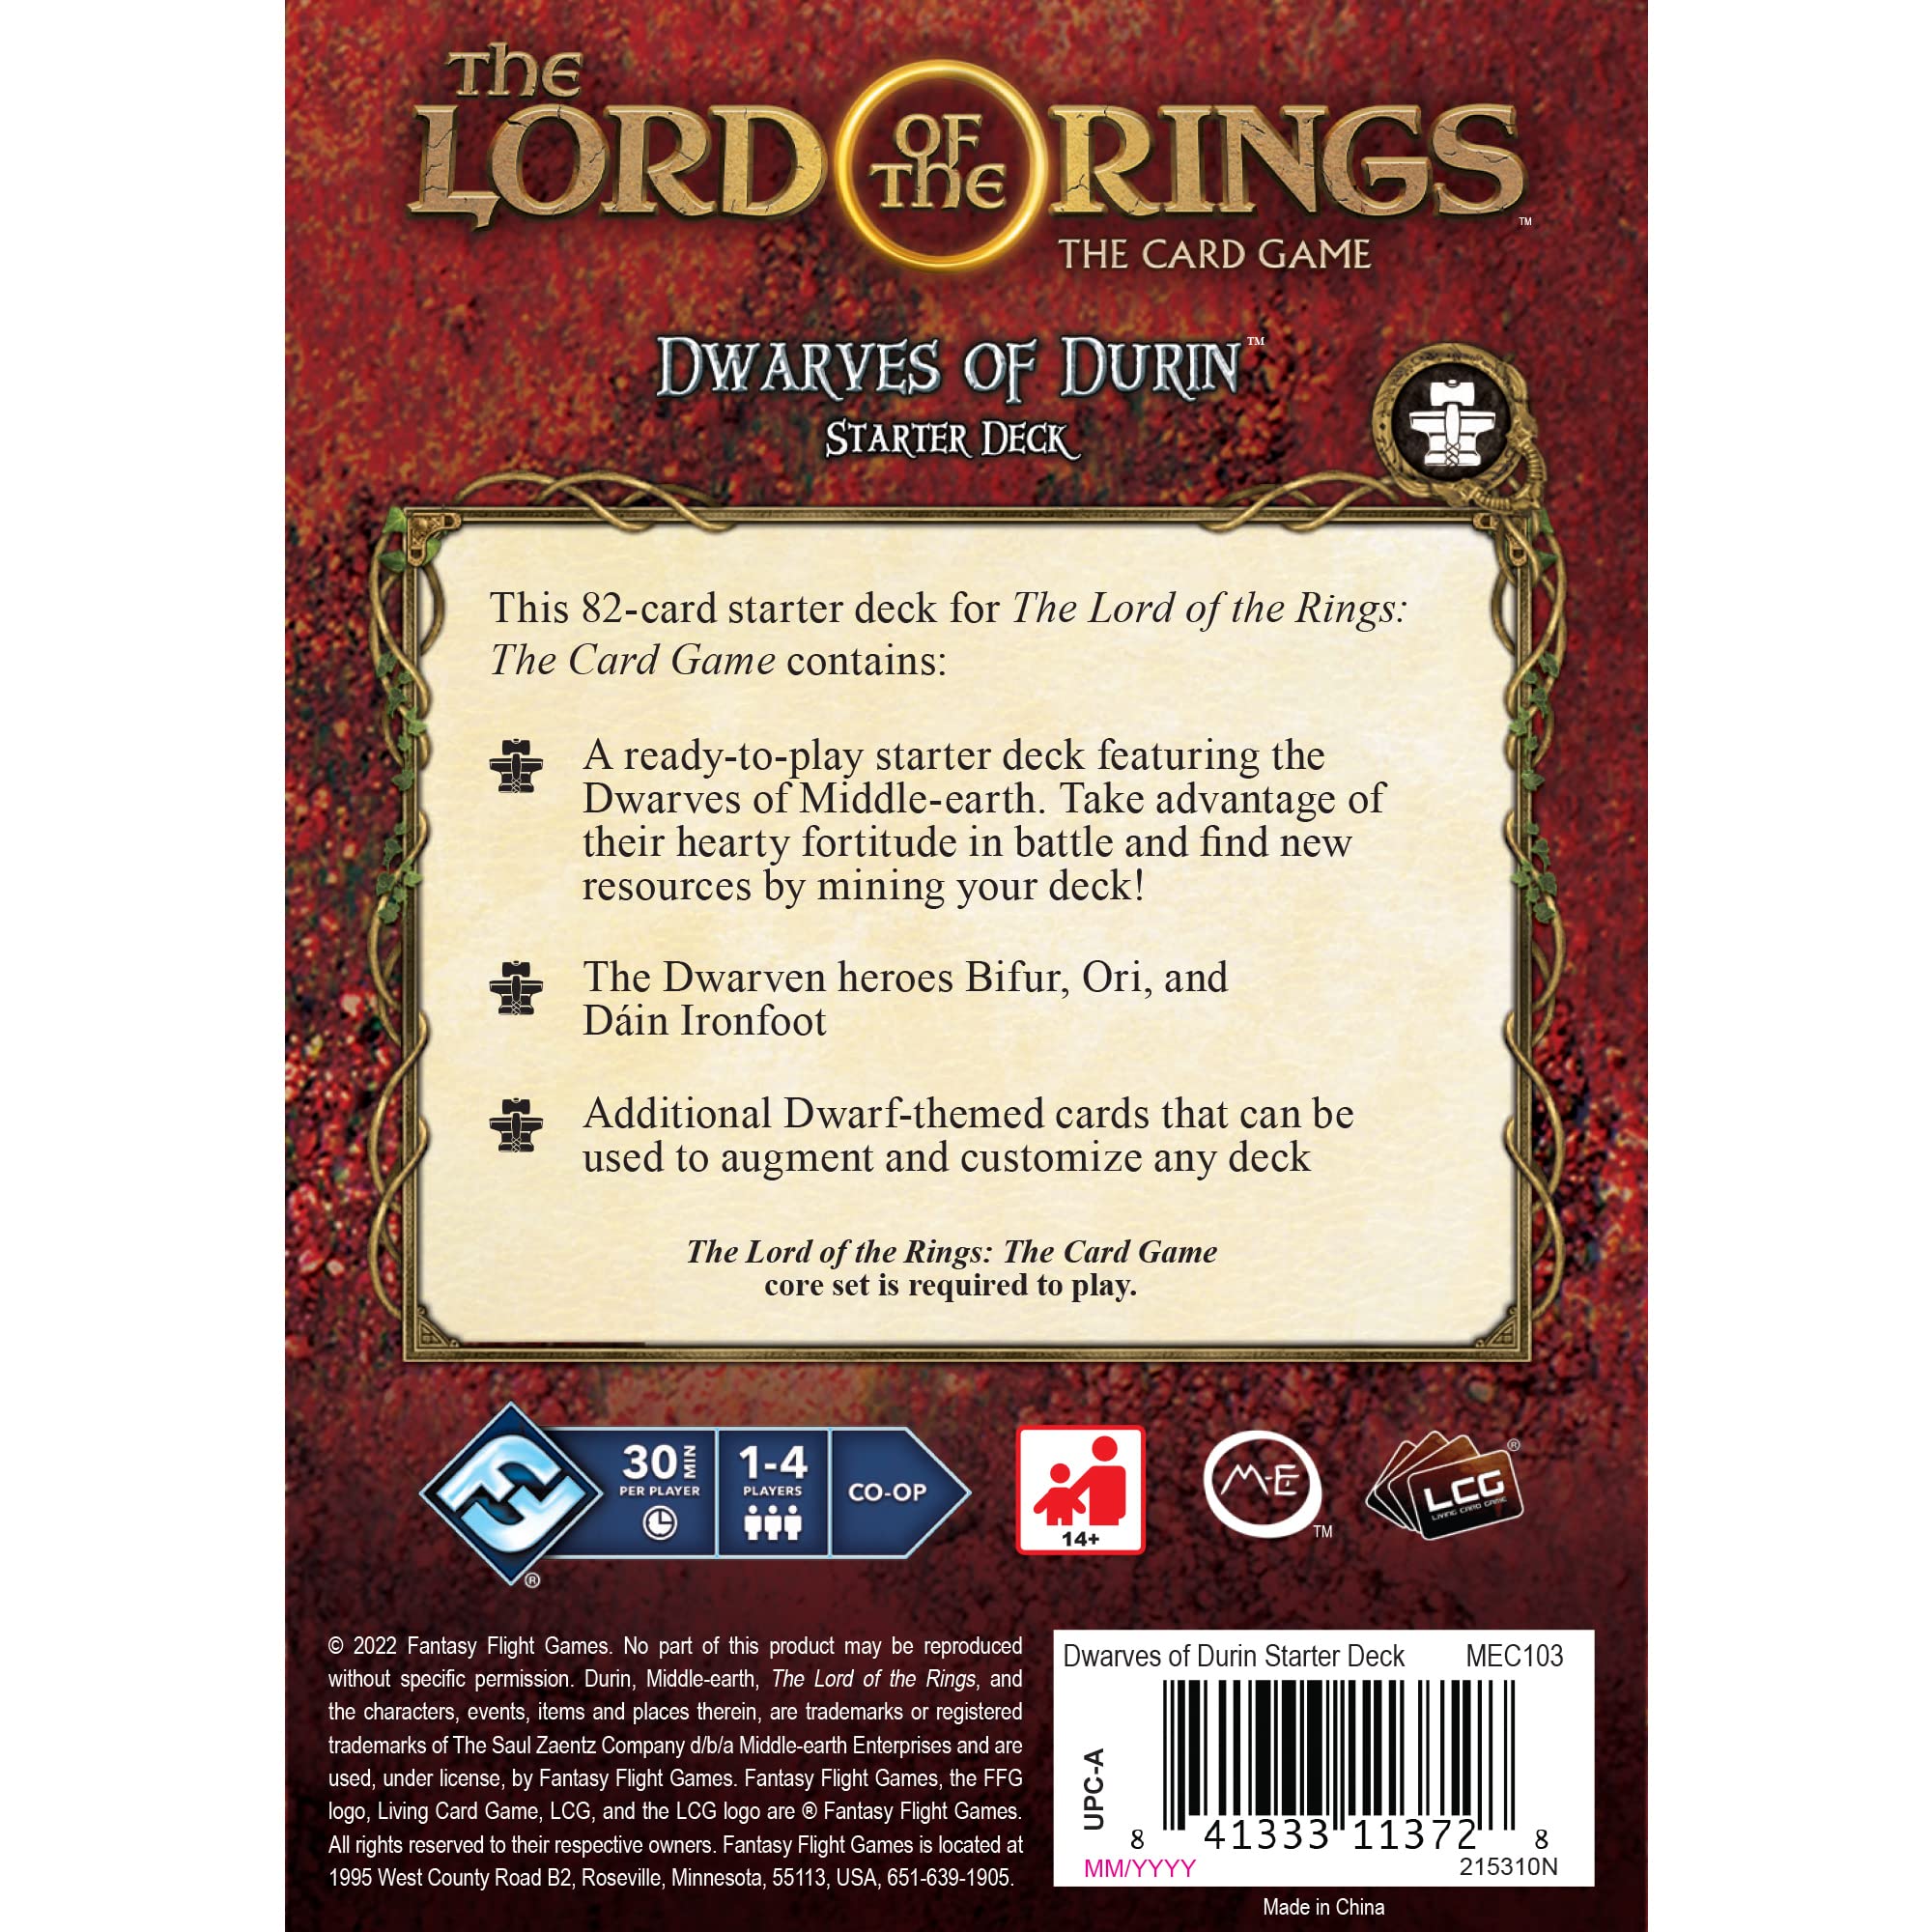 Fantasy Flight Games The Lord of The Rings The Card Game Dwarves of Durin Starter Deck - Cooperative Adventure Game, Strategy Game, Ages 14+, 1-4 Players, 30-120 Min Playtime, Made